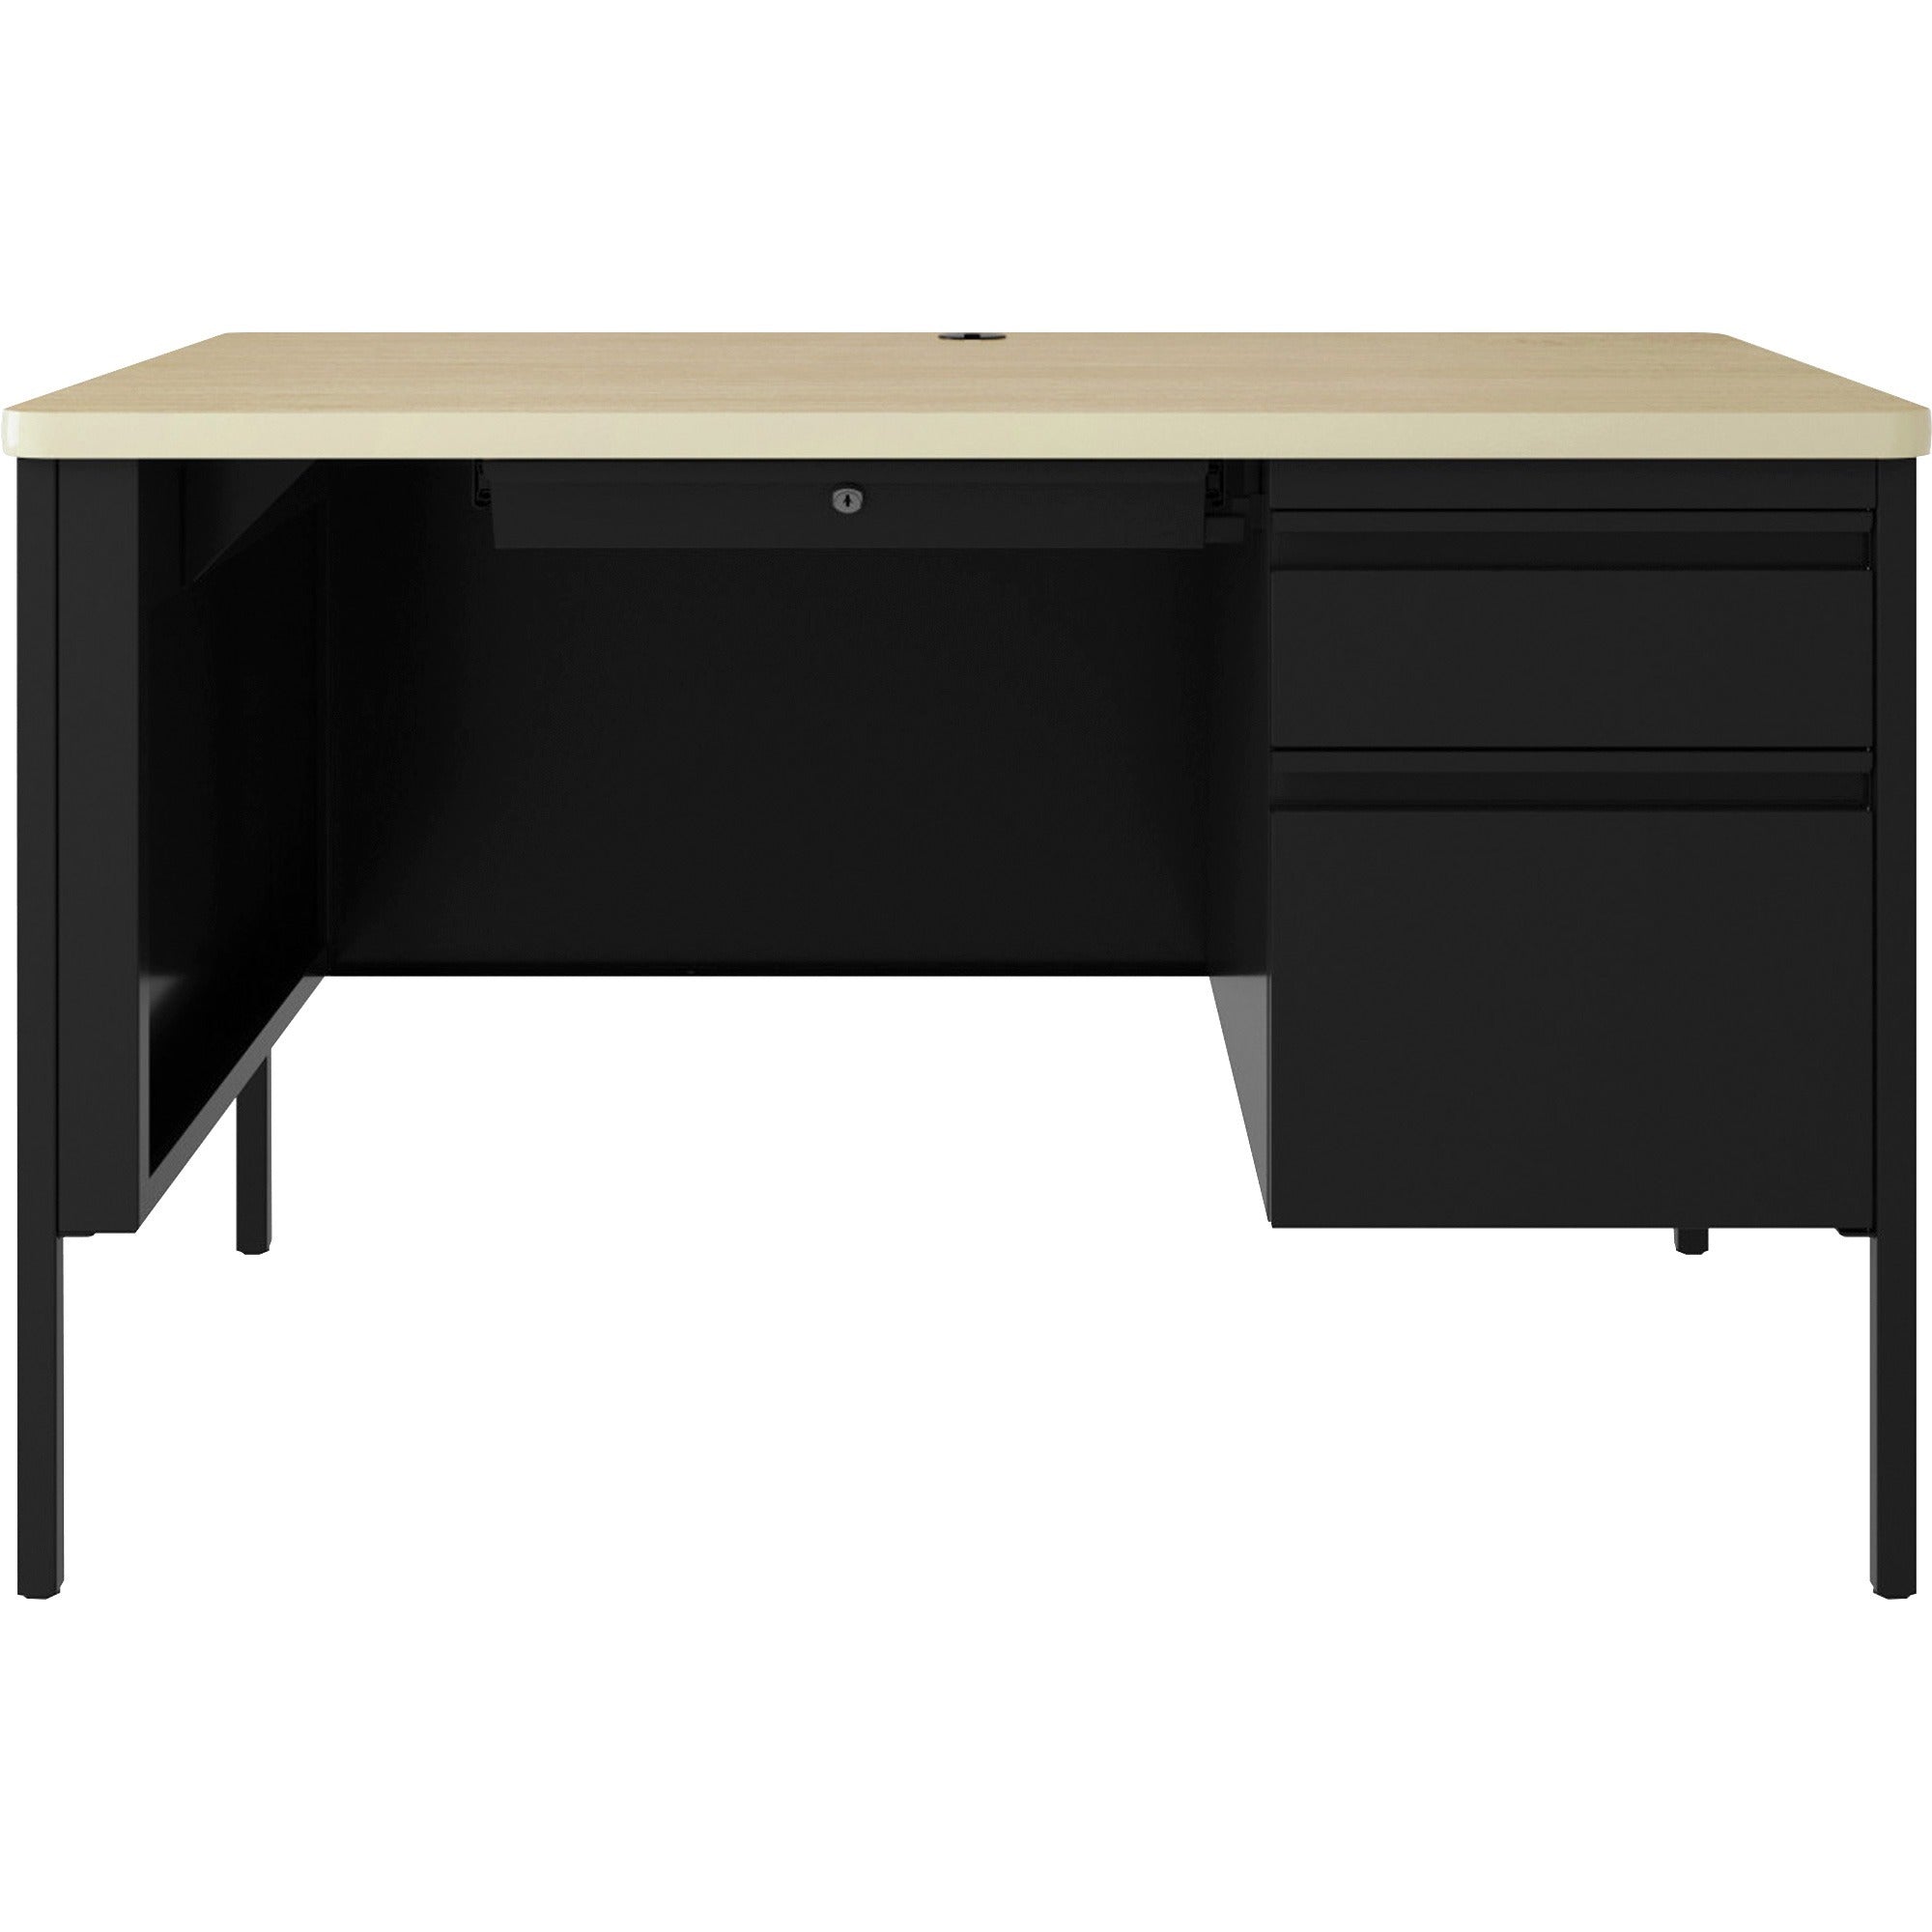 lorell-fortress-series-48-right-single-pedestal-desk-48-x-29530--08-modesty-panel-11-top-single-pedestal-on-right-side-square-edge-material-steel-finish-black_llr66907 - 2